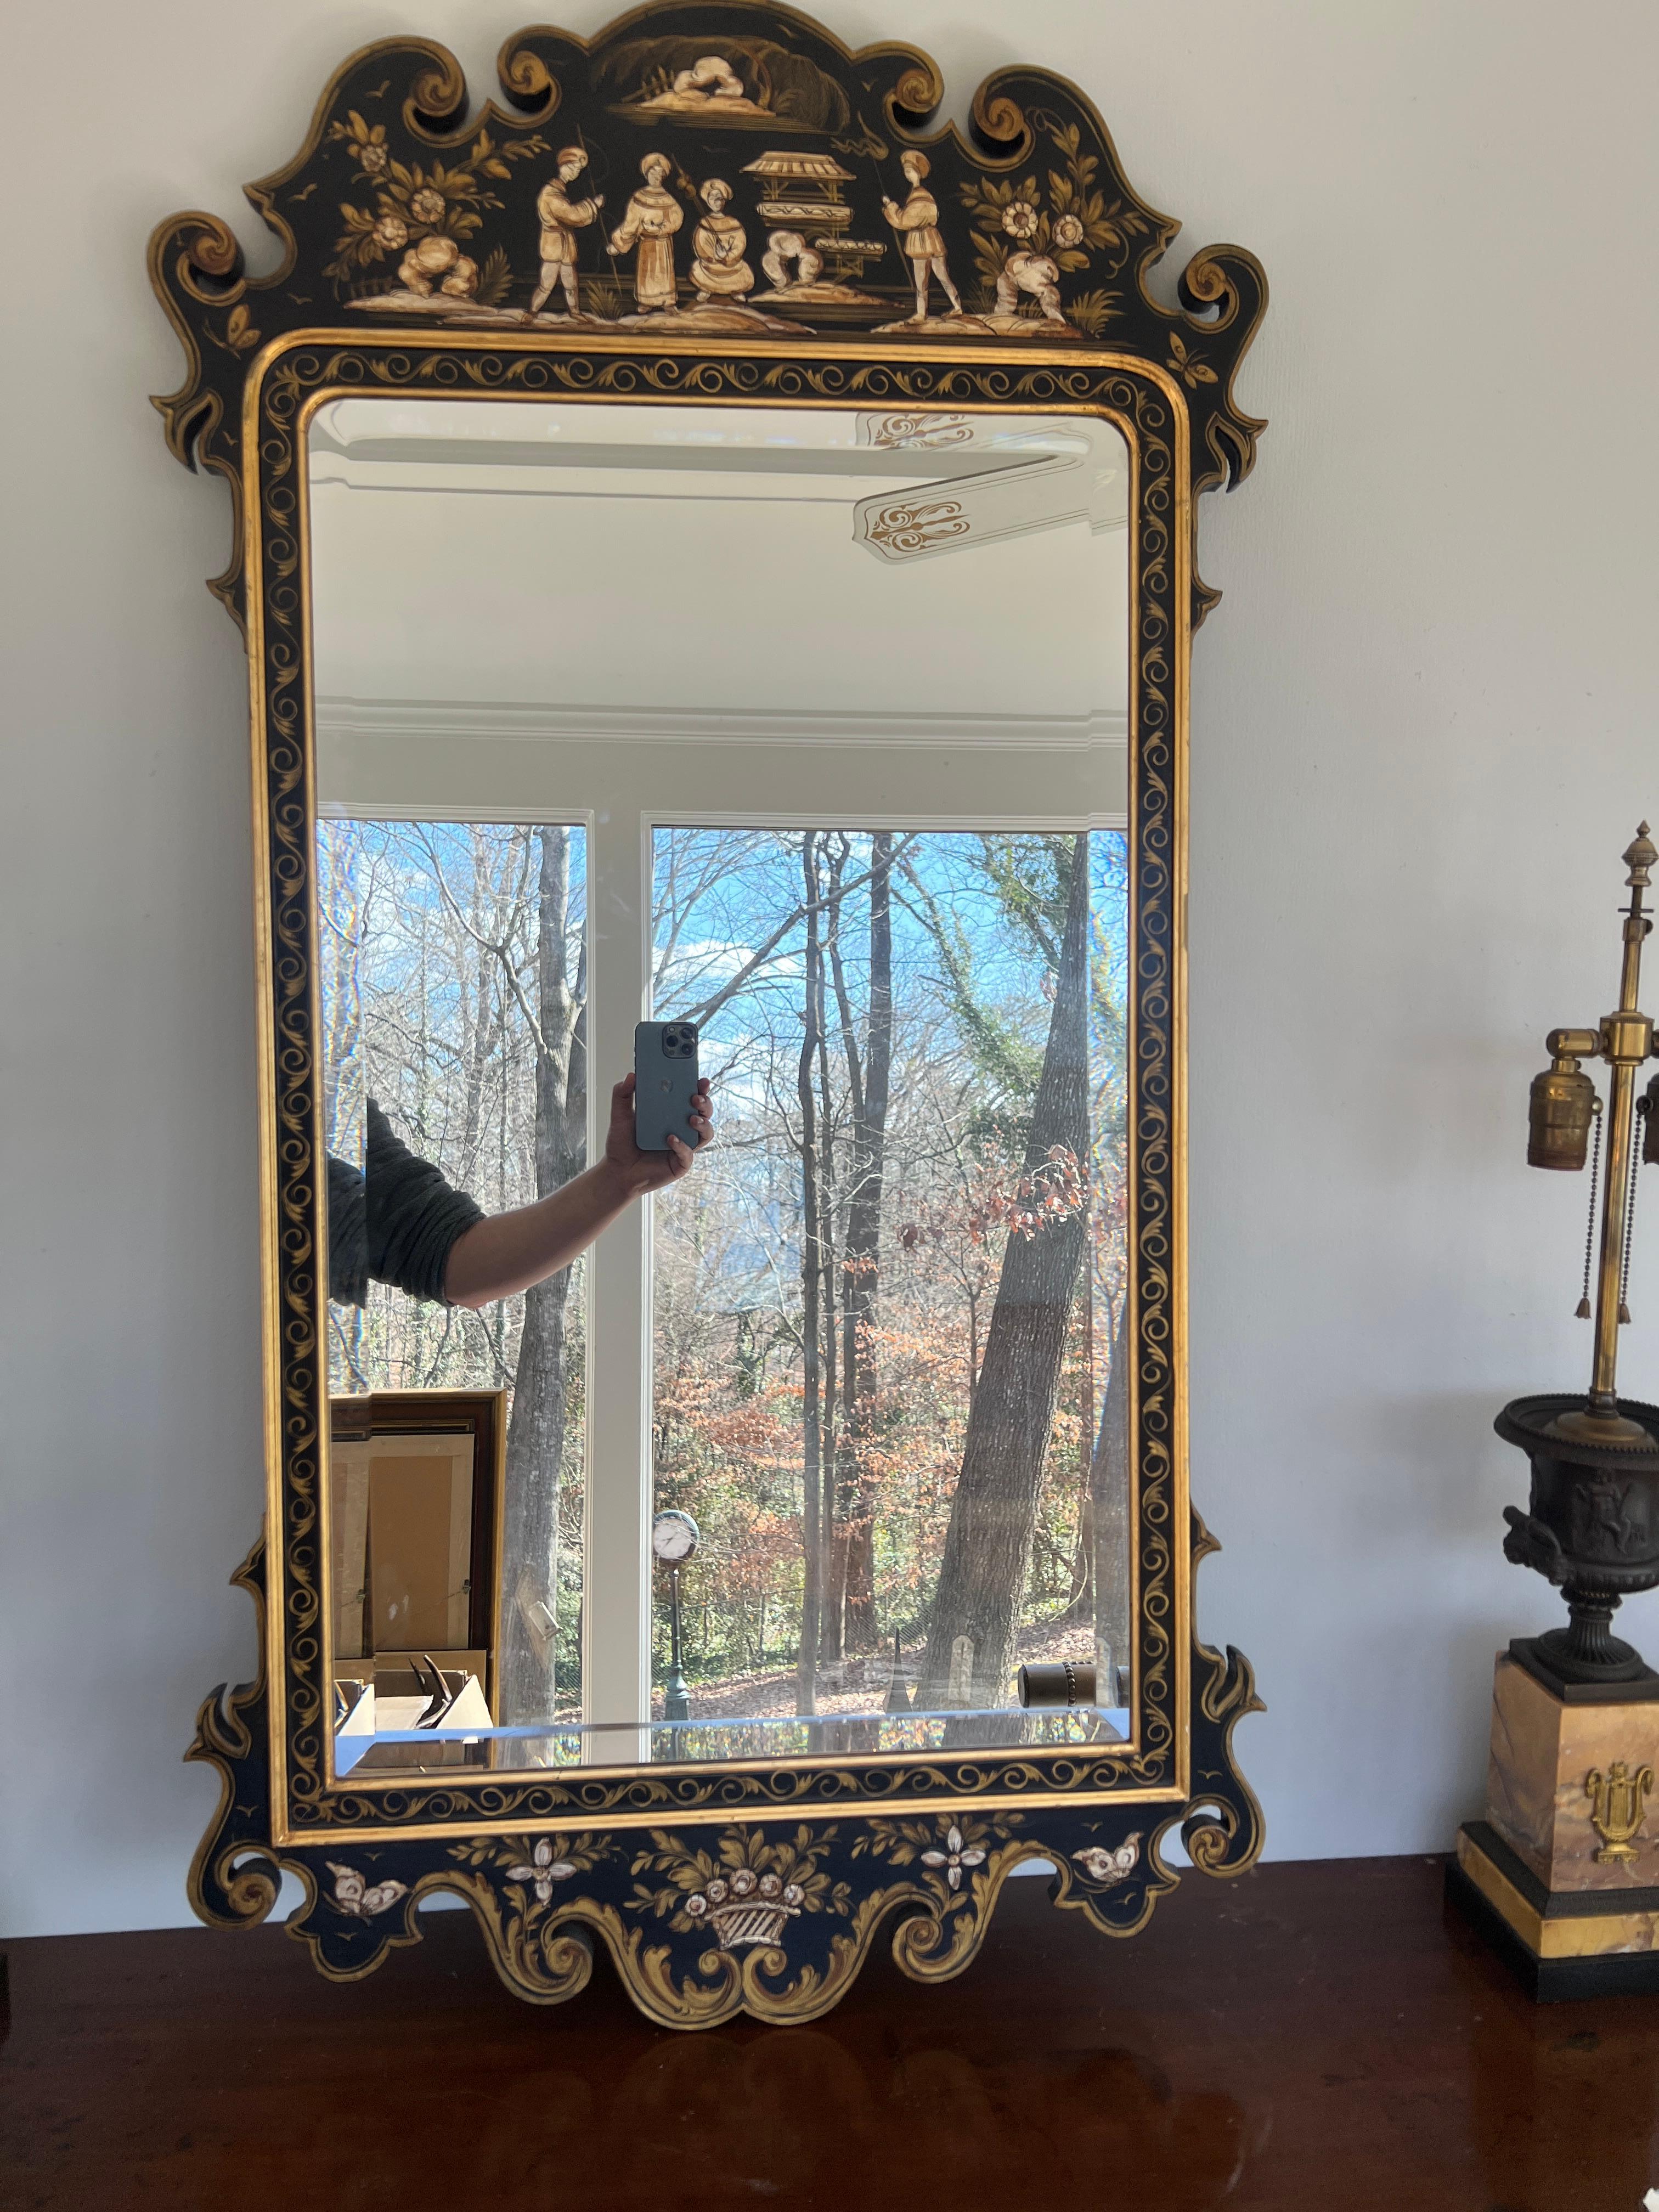 Italian, circa 1960.

A well decorated black and gold chinoiserie decorated wall mirror in the chippendale taste. Mirror plate has beveled glass and original back to mirror.